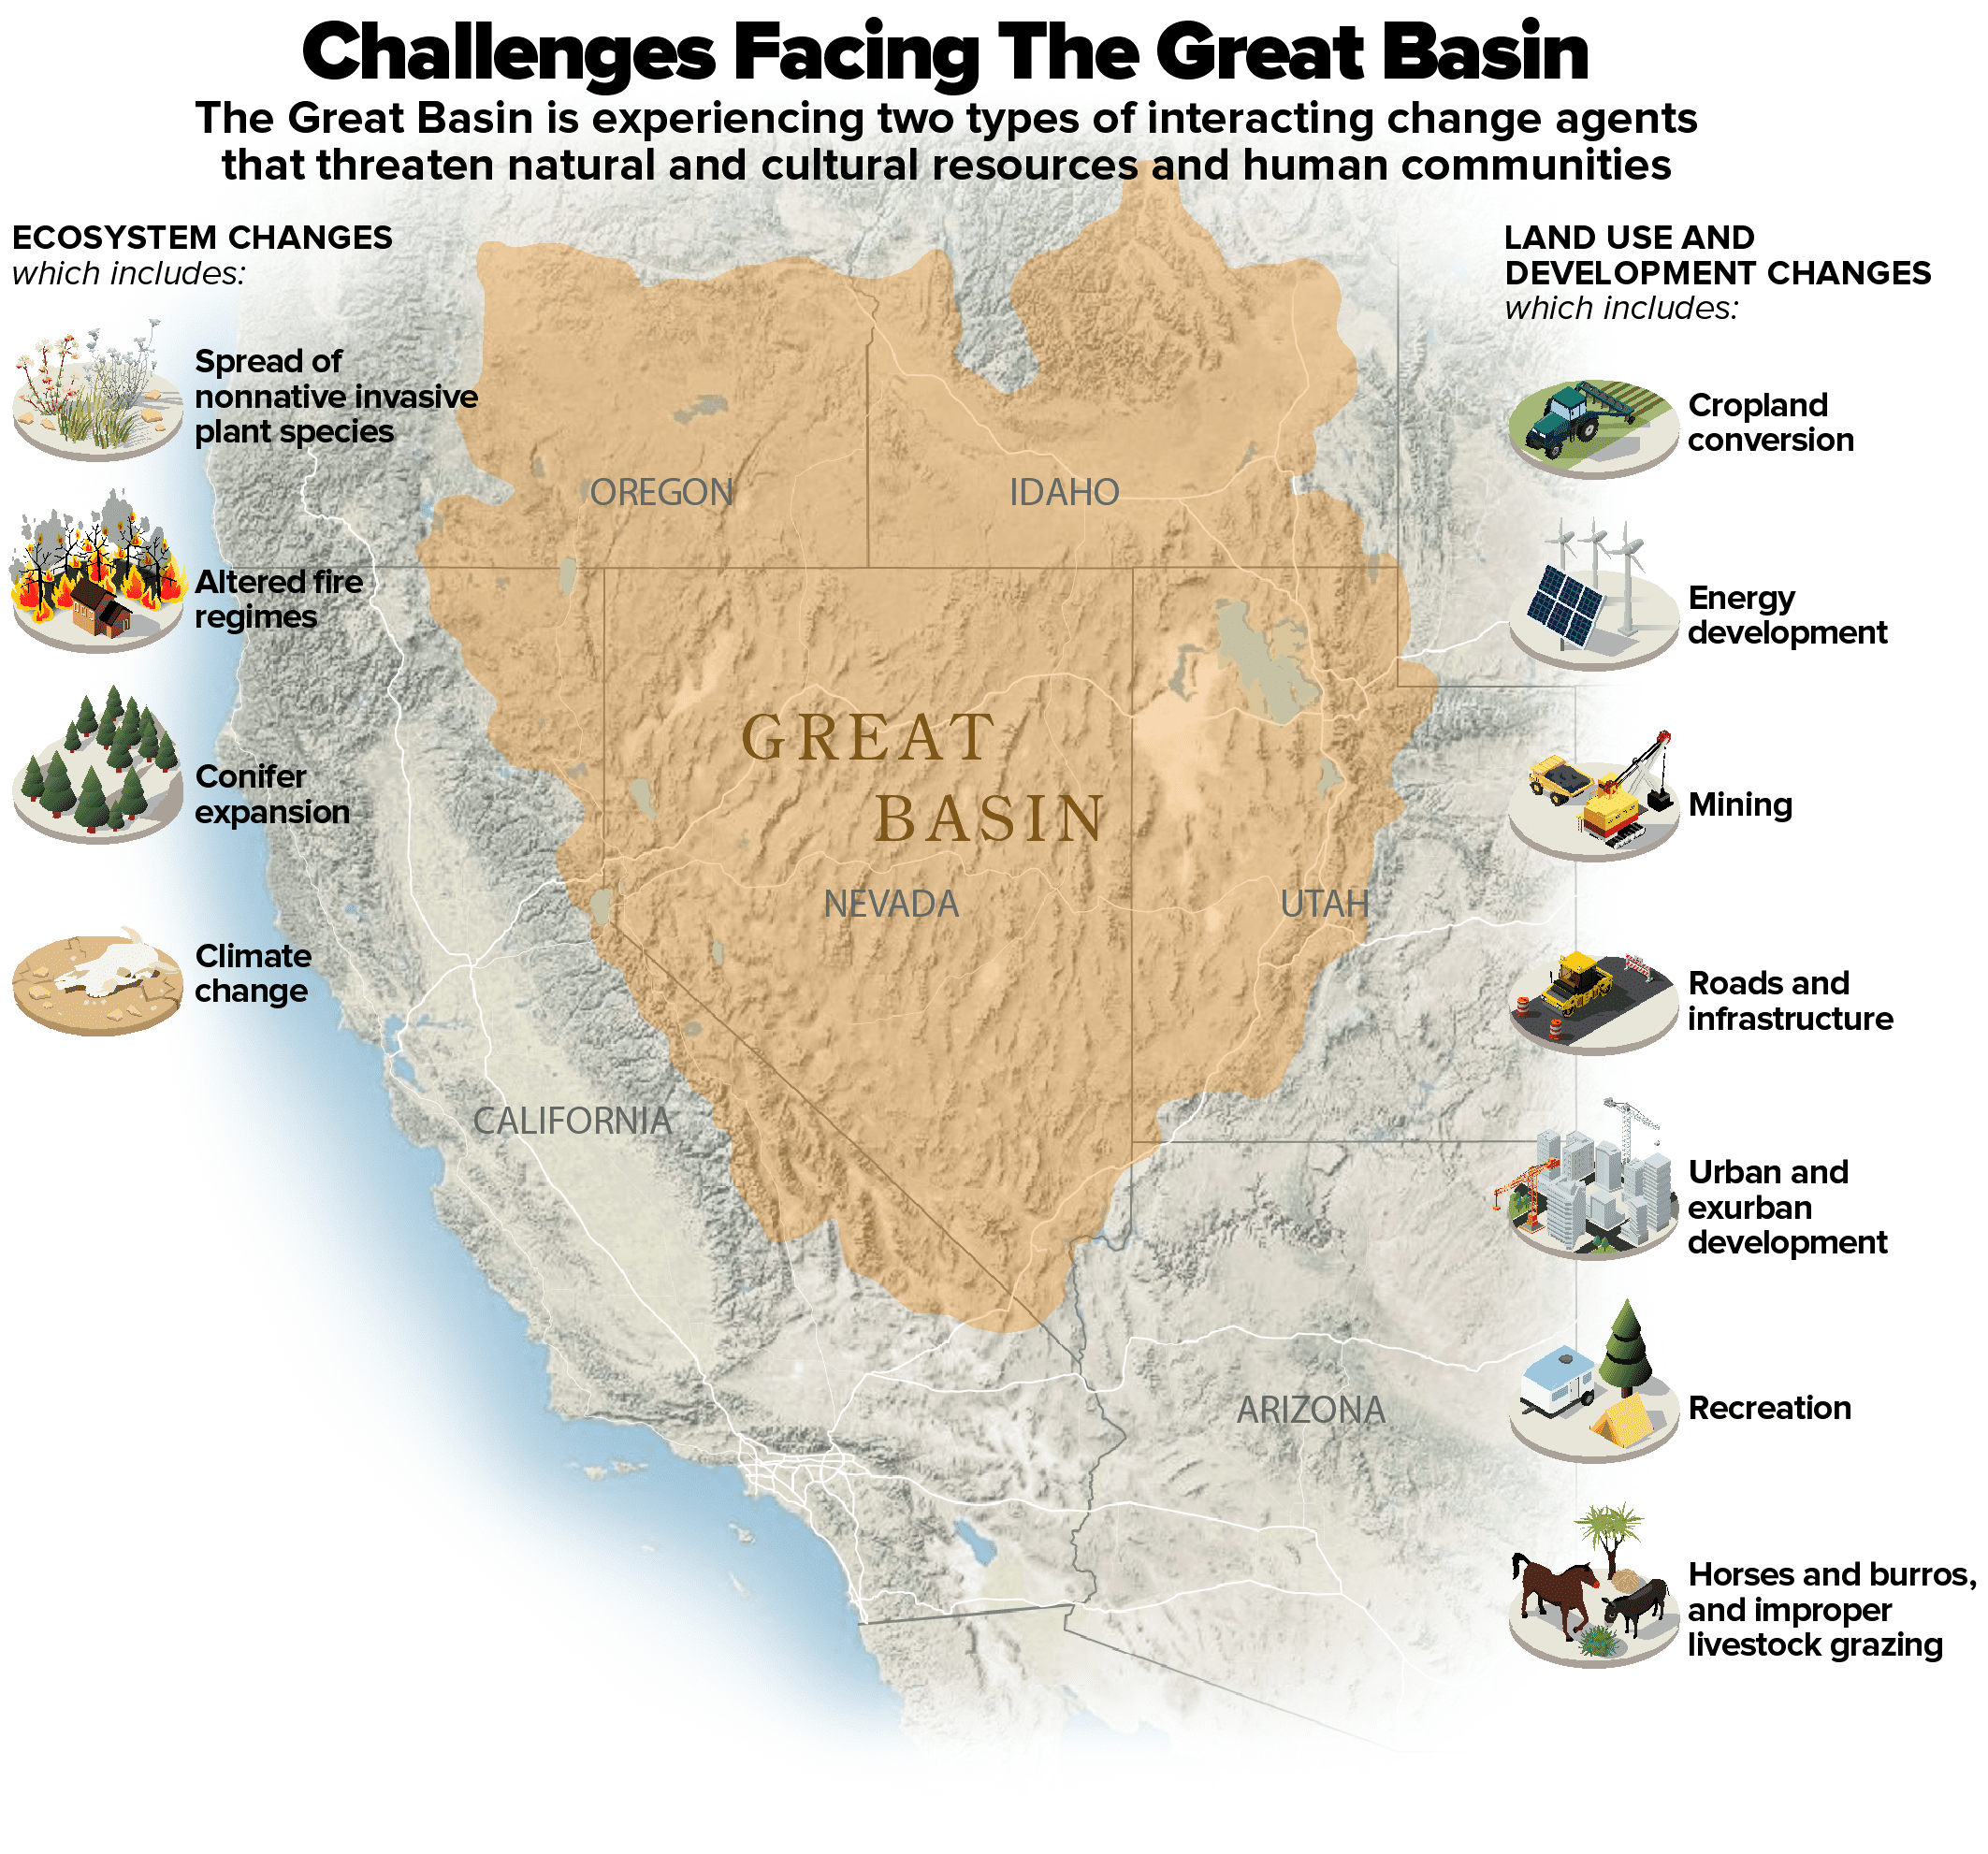 This is a graphic that depicts the challenges facing the great basin as described in the text.